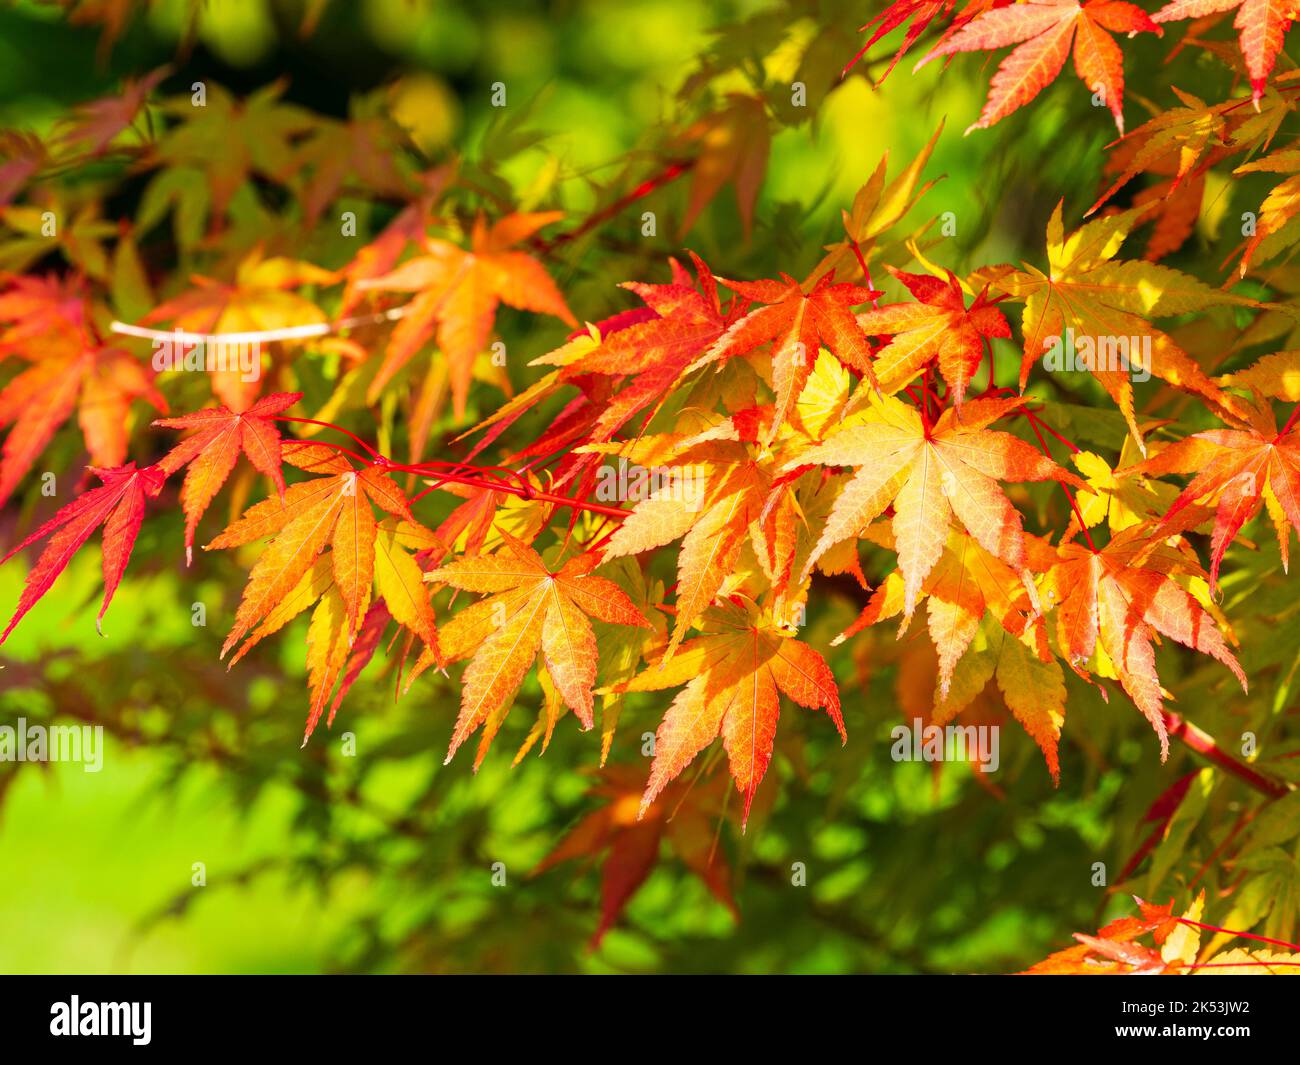 Red gold autimn leaves and red stems of the hardy Japanese maple, Acer palmatum 'Eddisbury' Stock Photo